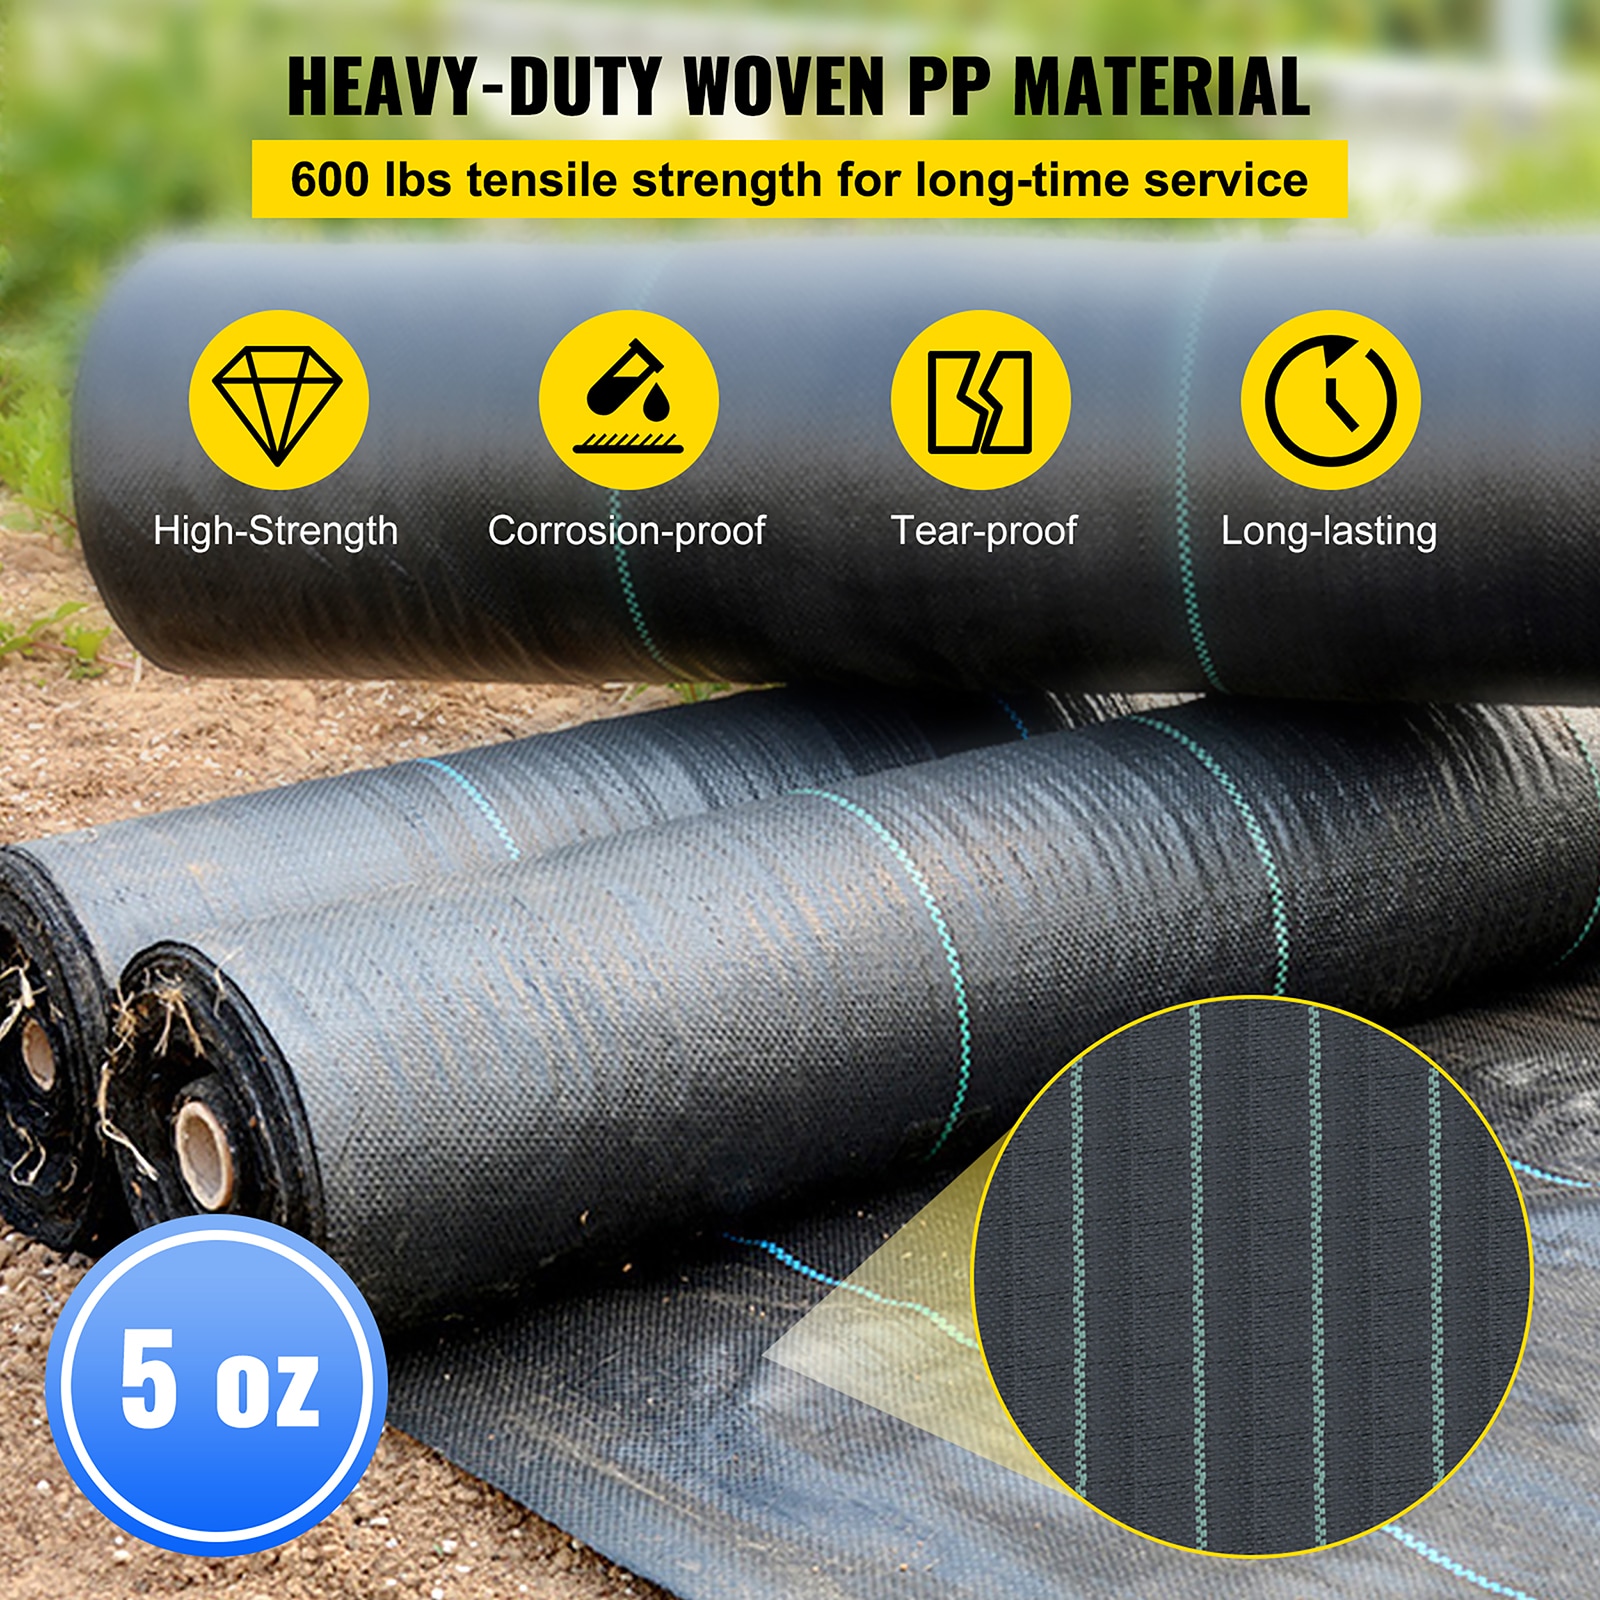 Super Geotextile 4, 6, 8 oz Non Woven Fabric for Landscaping, French  Drains, Underlayment, Erosion Control, Construction Projects - 8 oz (3x50)